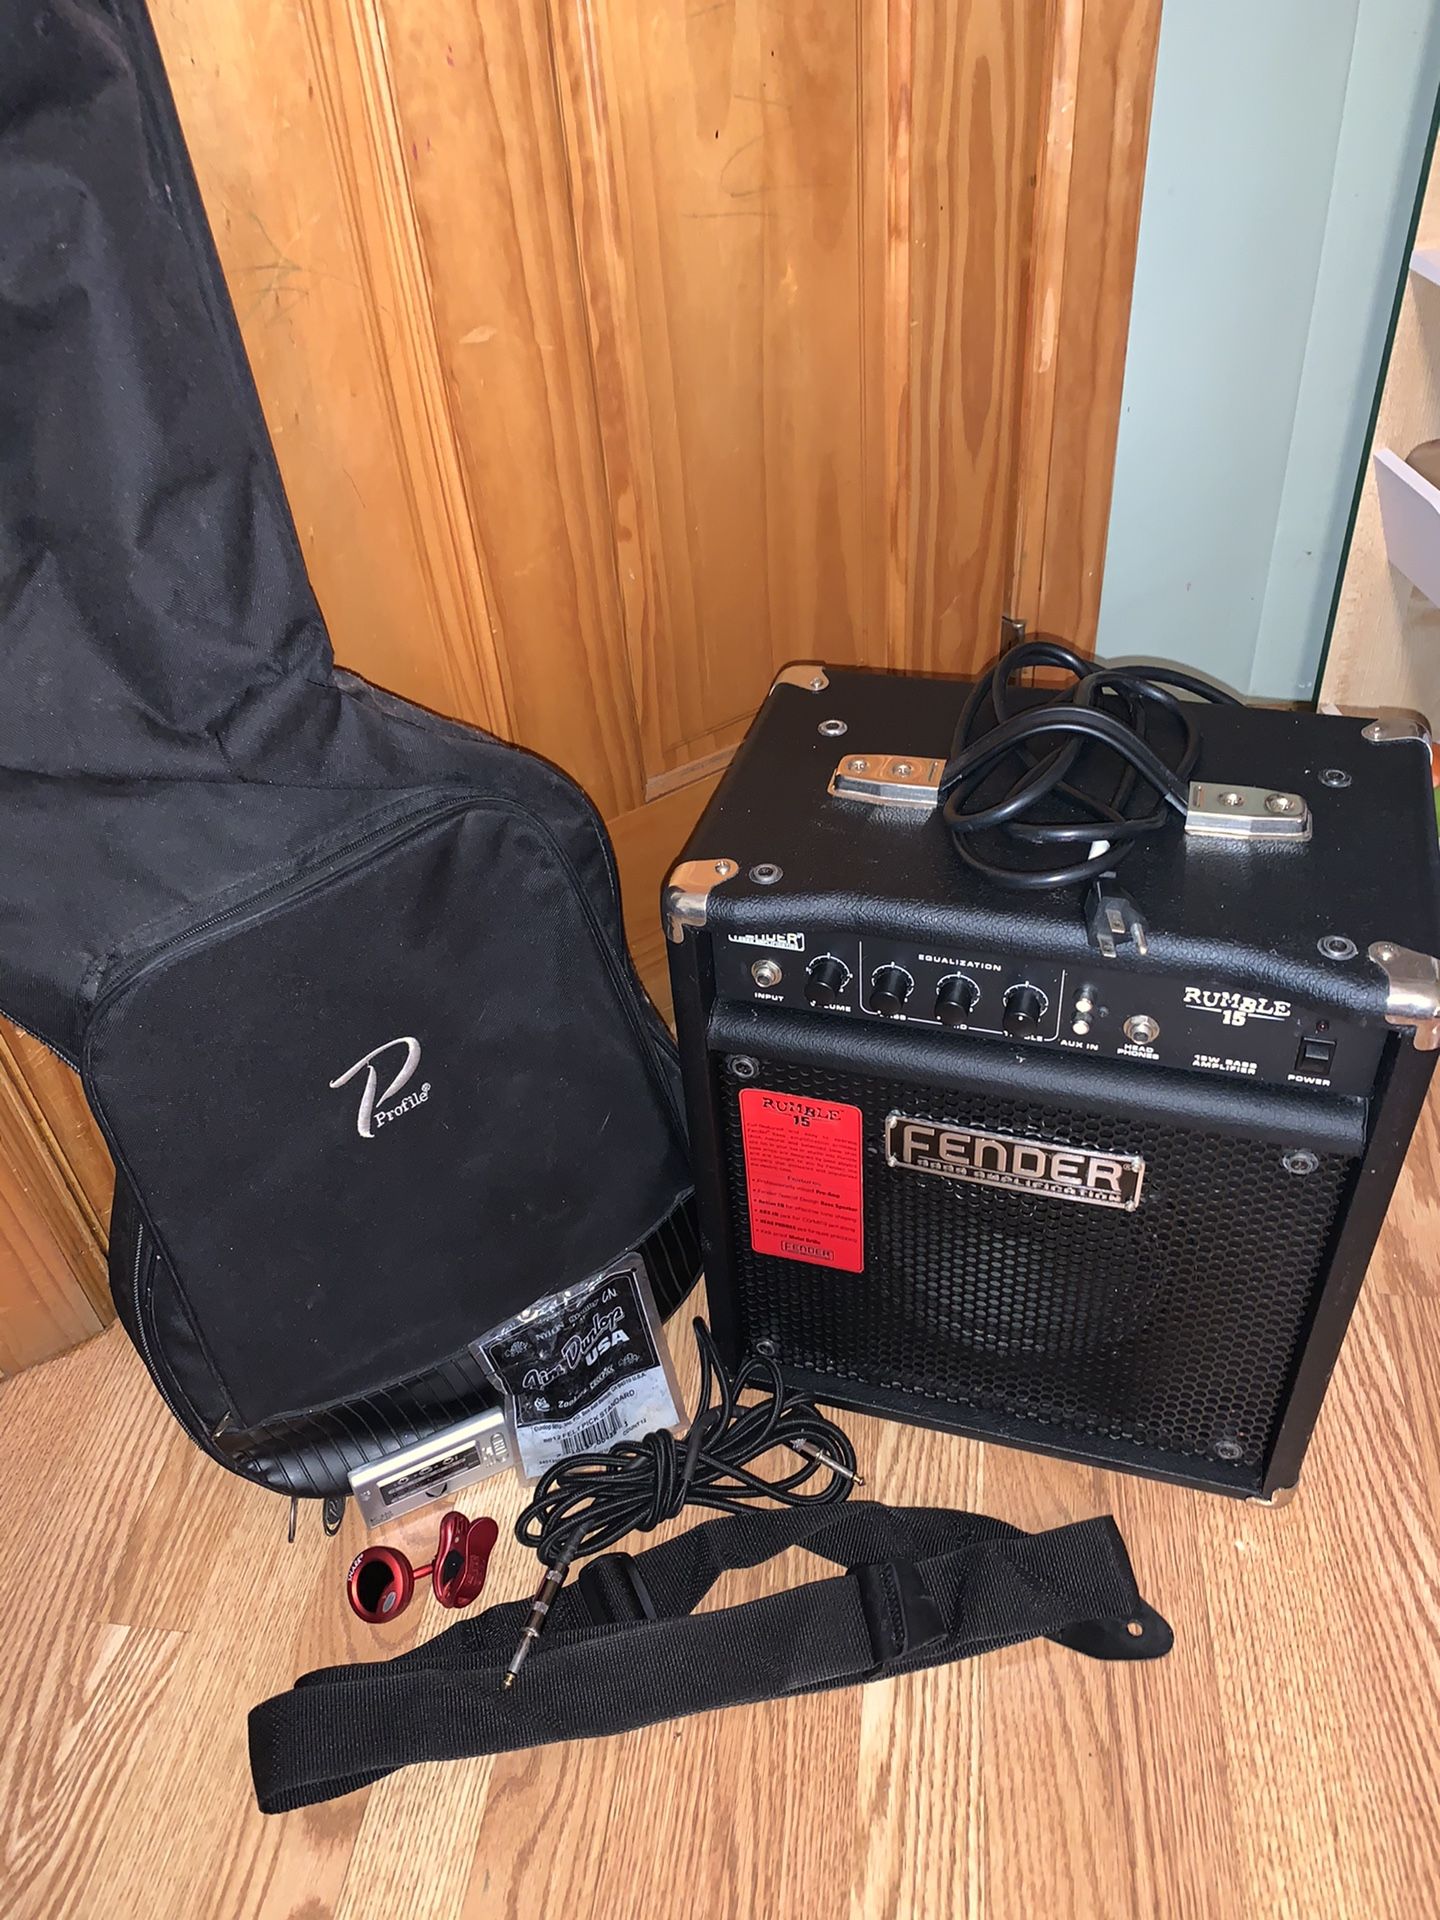 Dean Bass Guitar, Fender Amplifier and Accessories (BUNDLE) (MUST PICK UP IN QUEENS) NEGOTIABLE